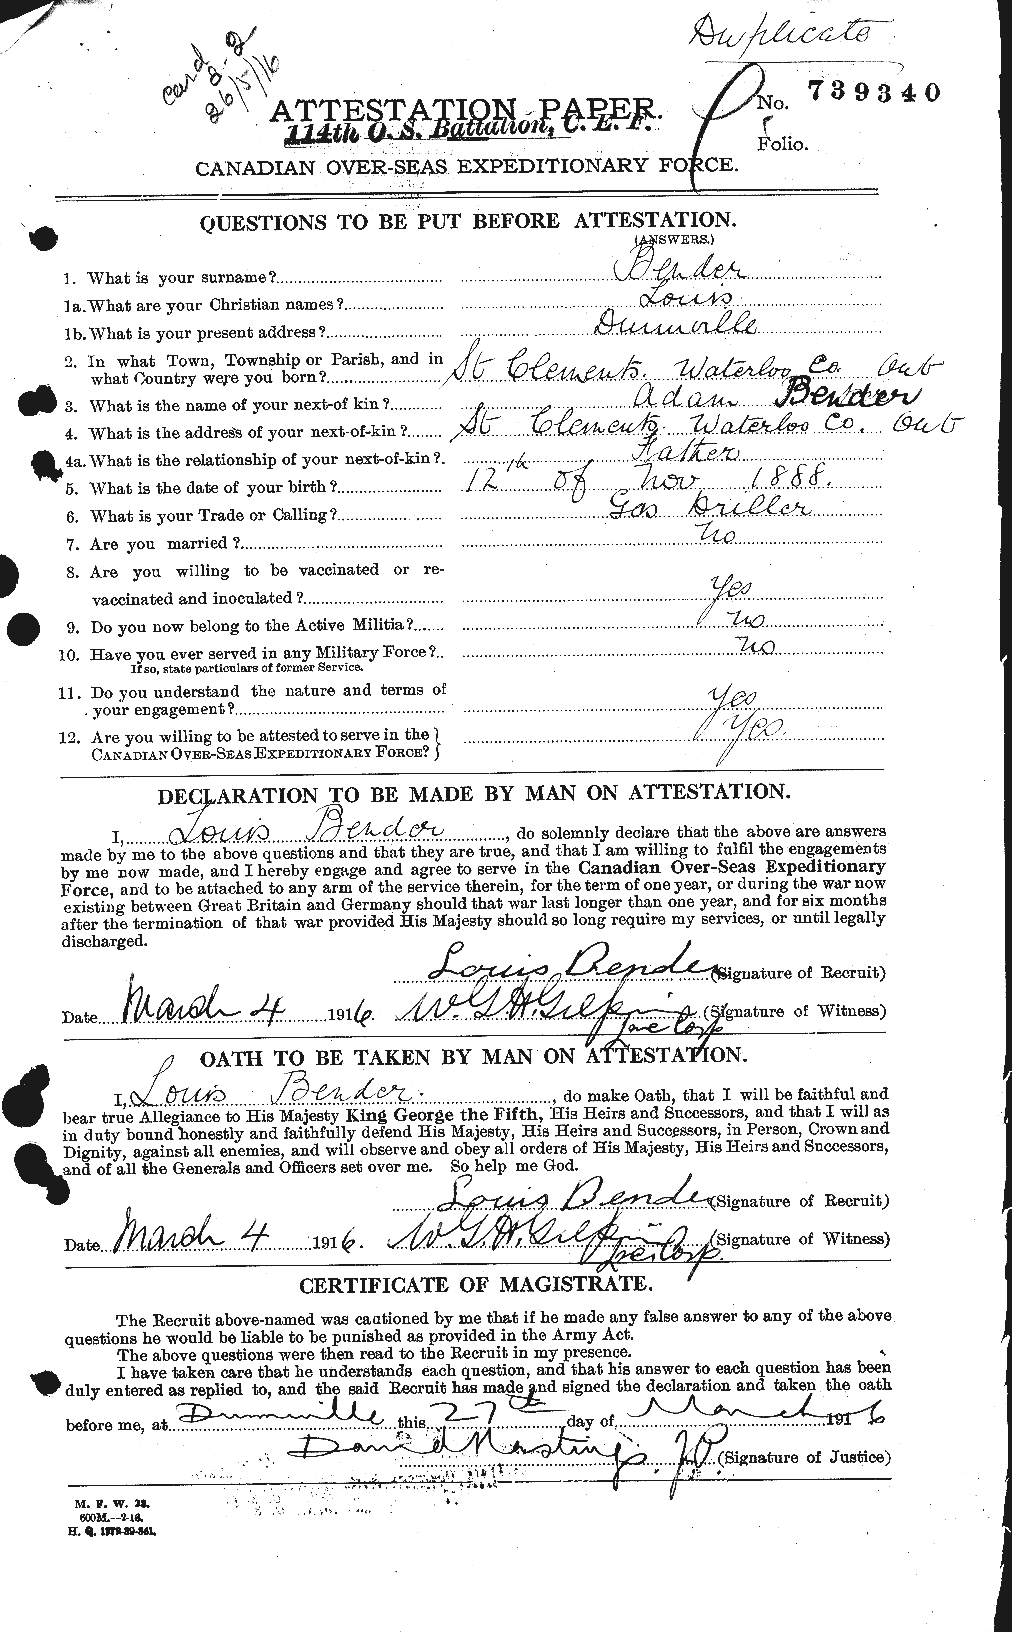 Personnel Records of the First World War - CEF 235701a